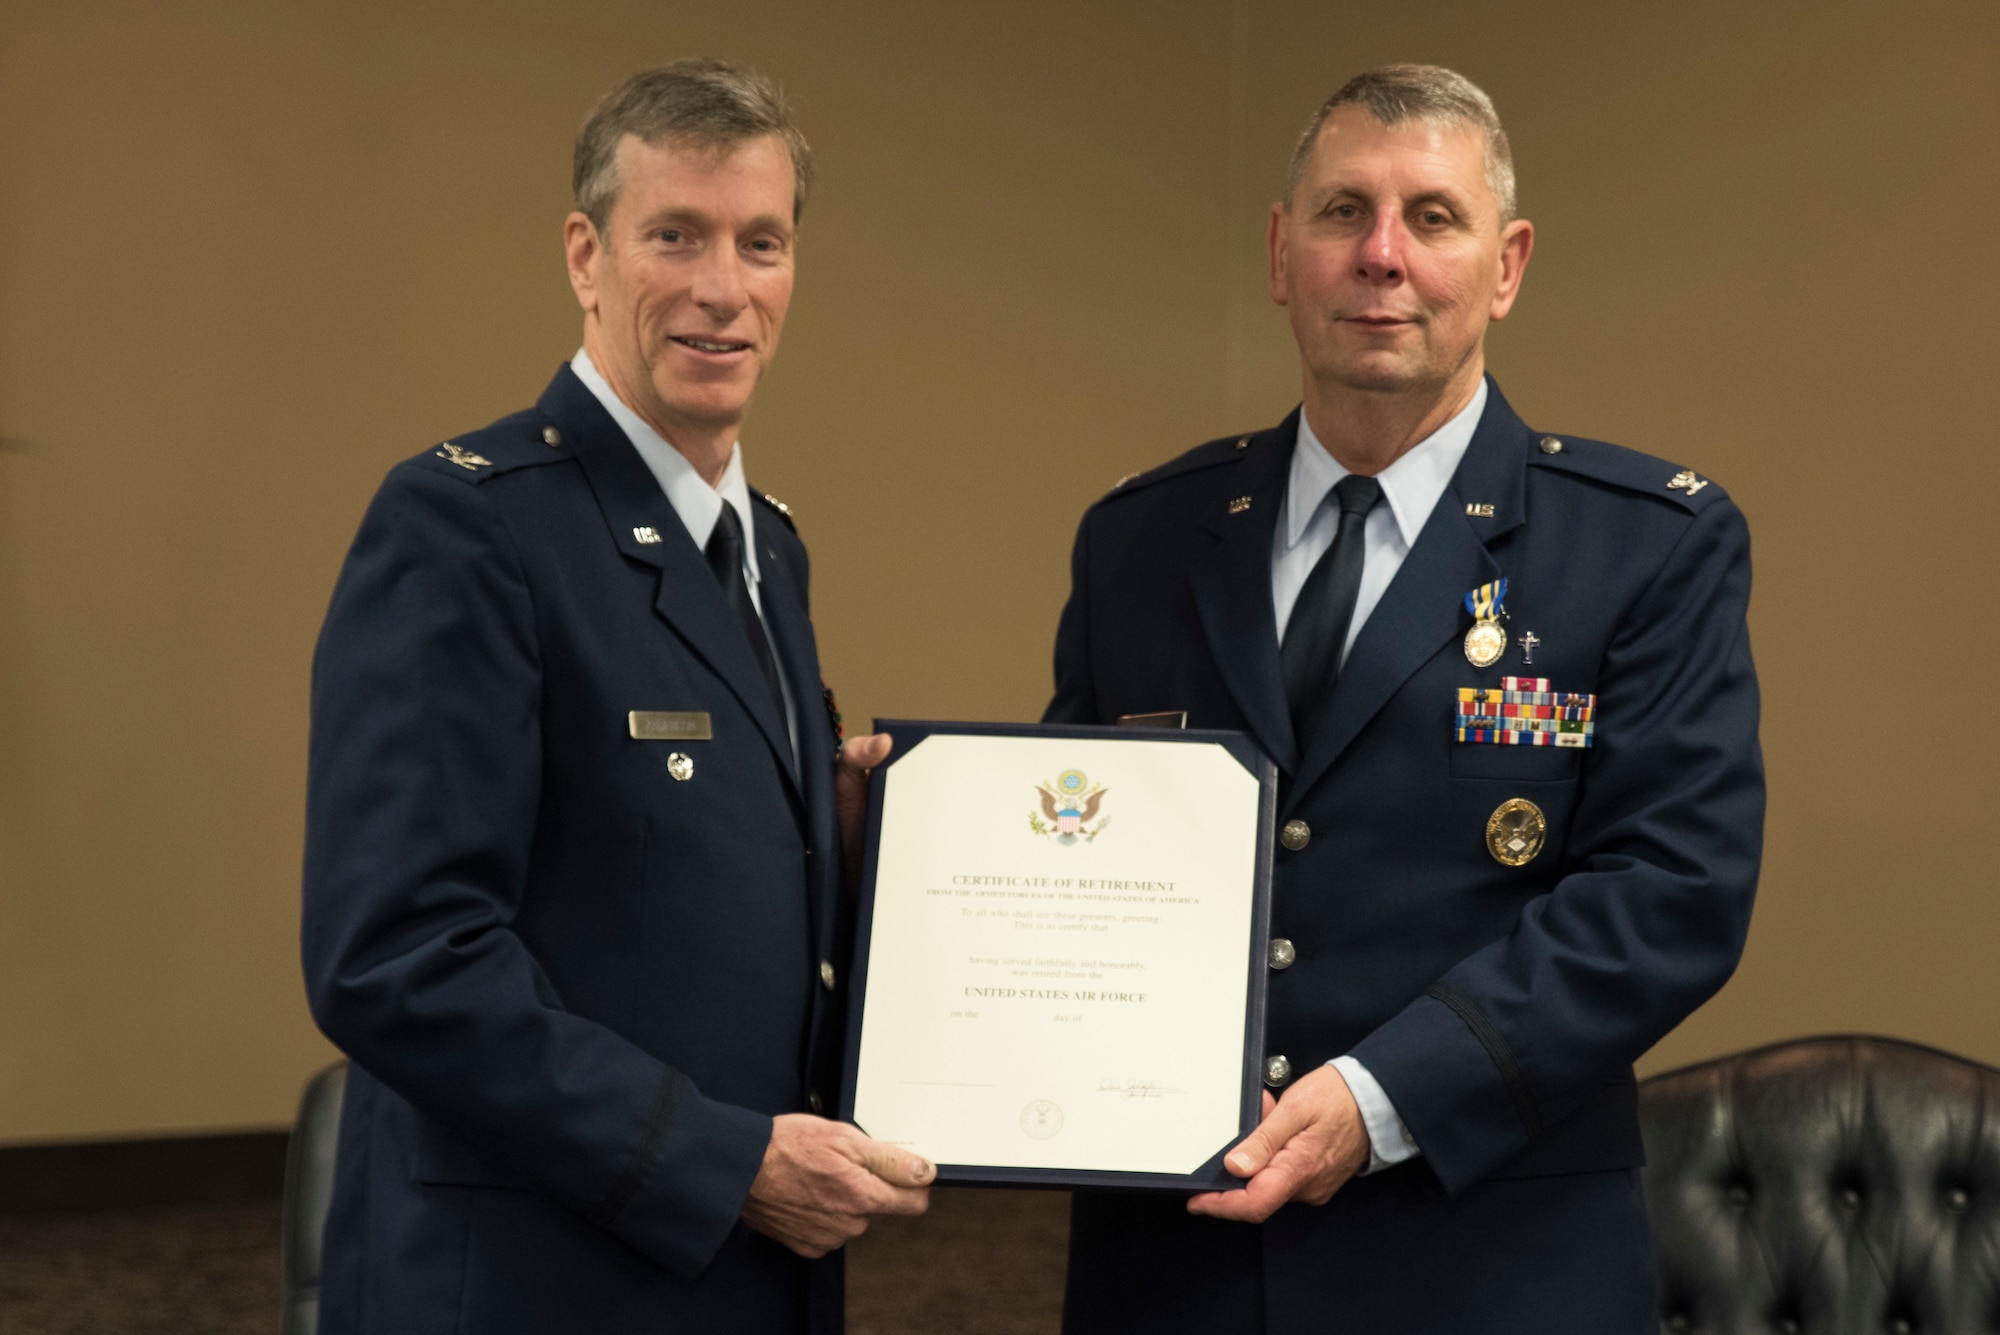 Retired Col. Mark W. Anderson, Former Commander 188th Wing, presents Col. Smith, retired, with his Certificate of Retirement at Fort Smith, AR., Apr. 07, 2018. (U.S. Air National Guard photo by Tech. Sgt. Daniel Condit)